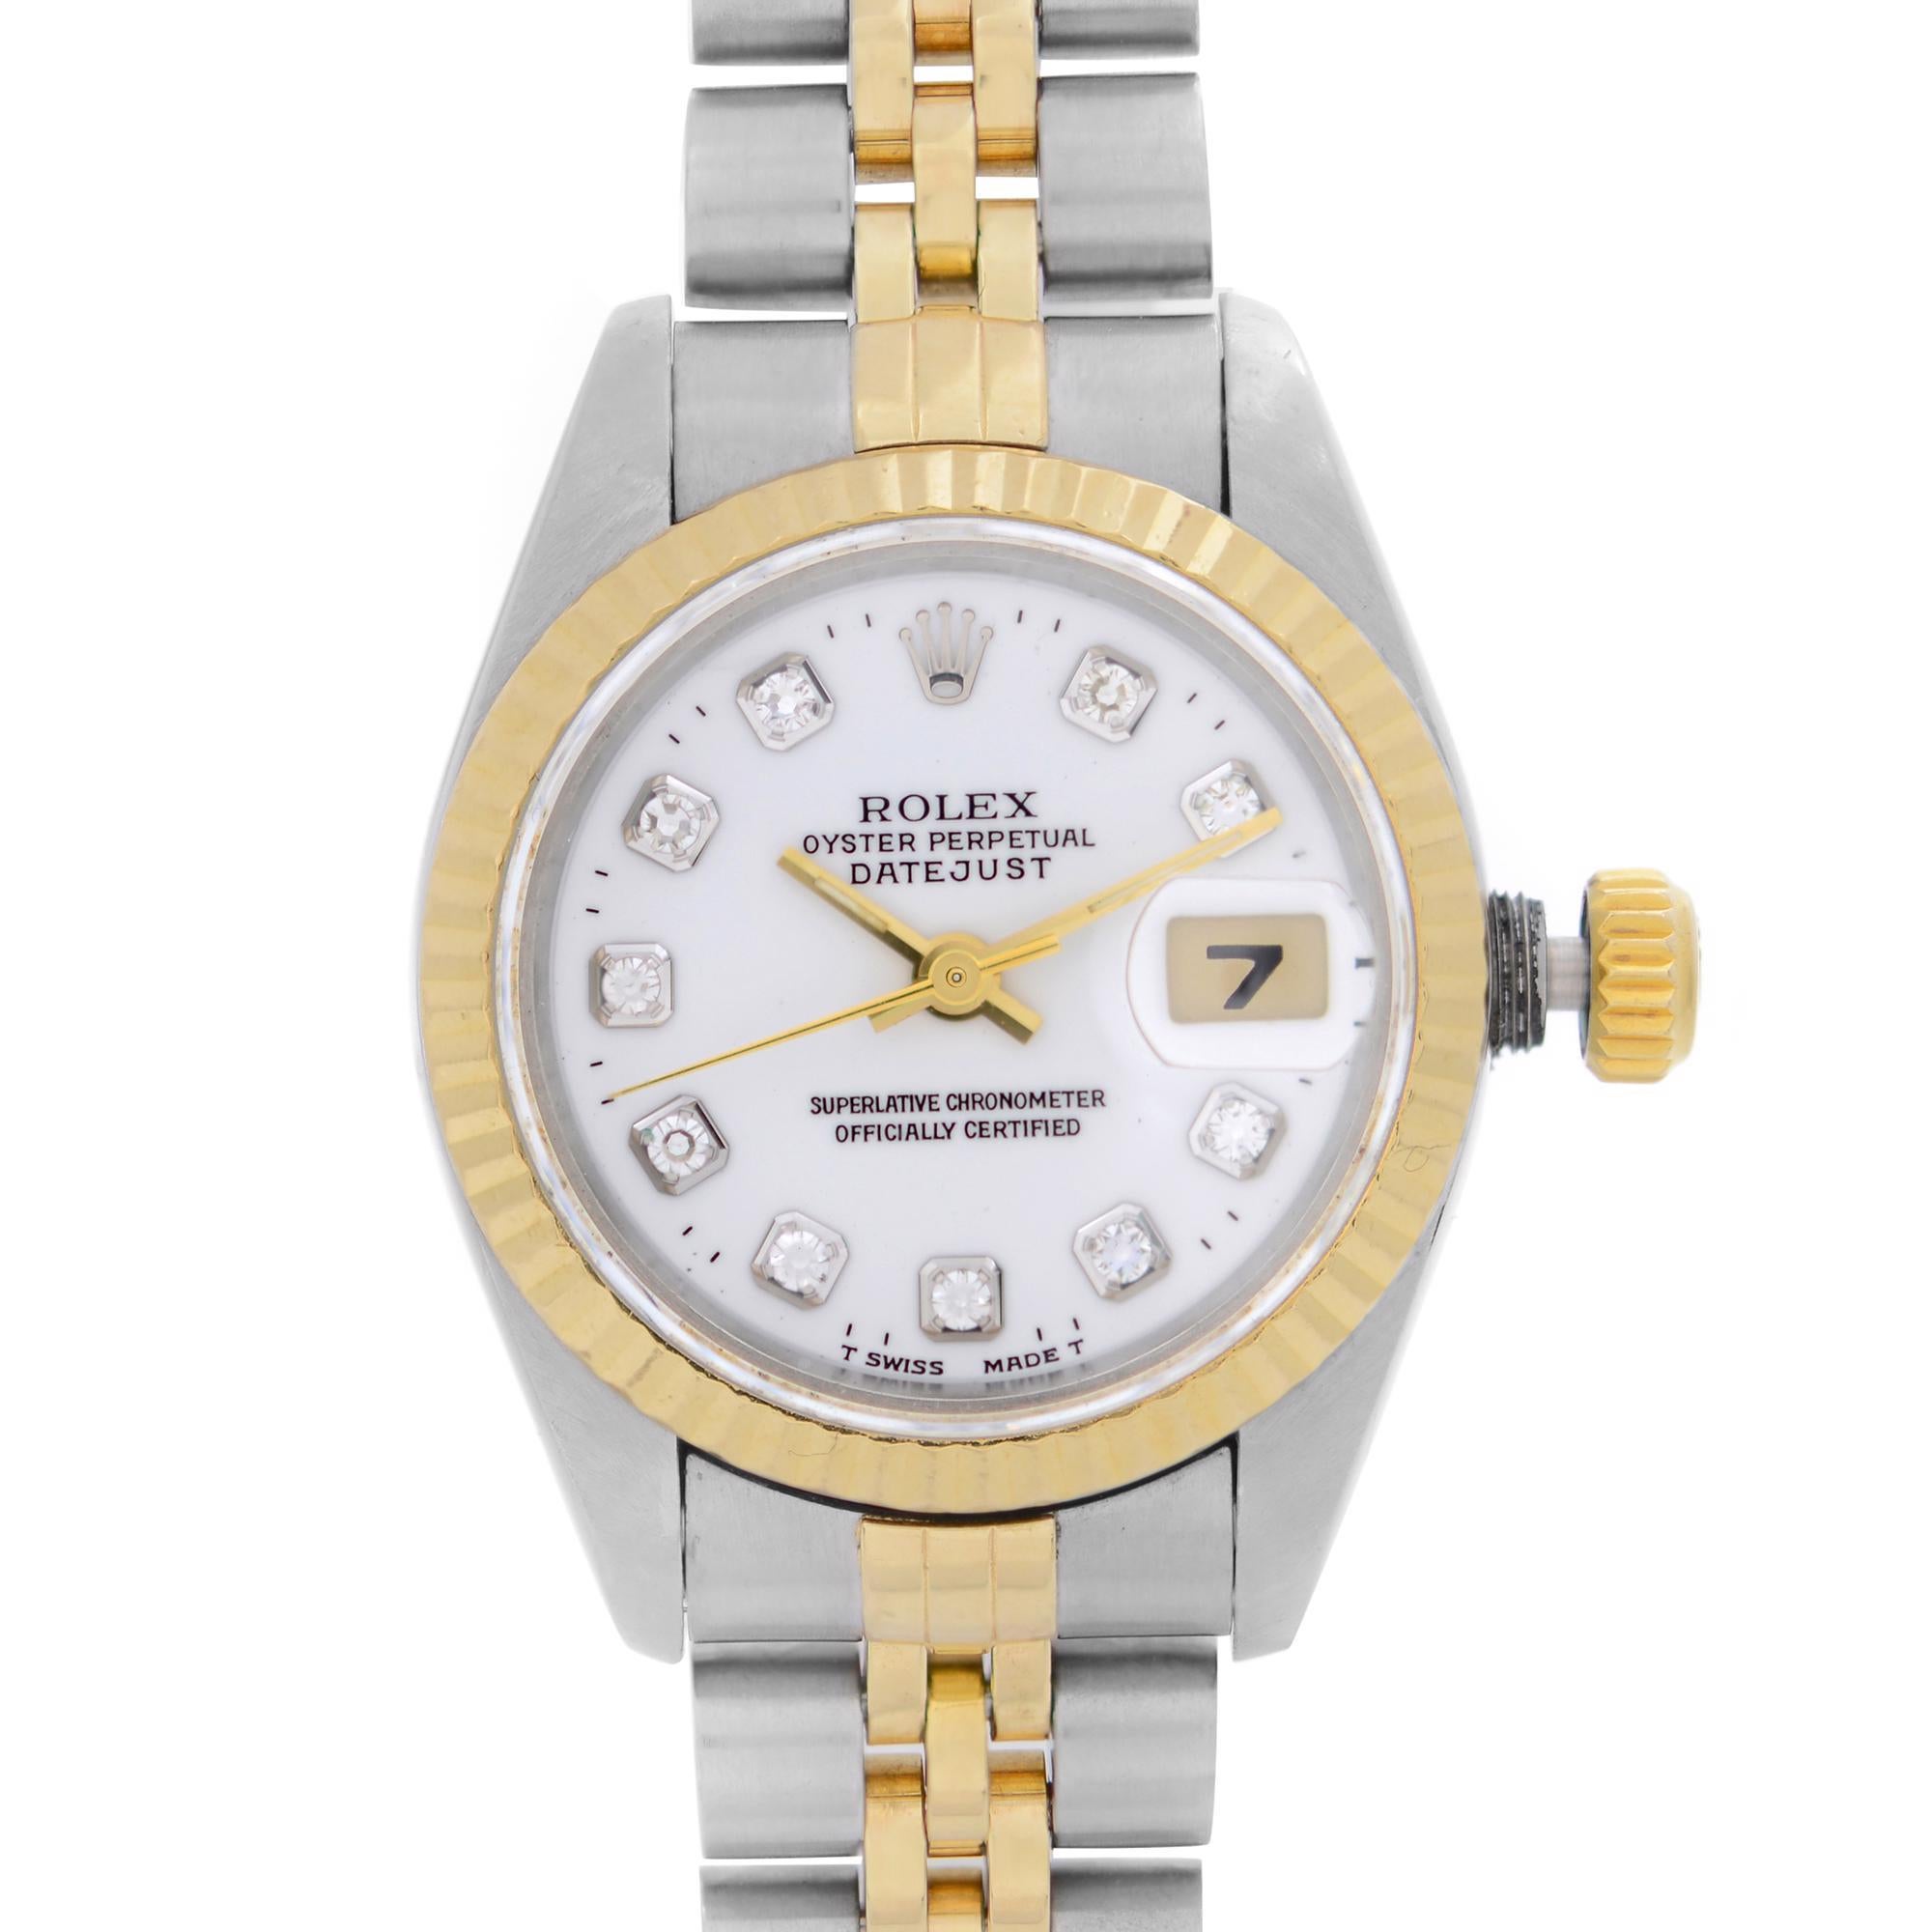 Pre-owned Rolex Datejust Steel 18k Yellow Gold White Diamond Dial Ladies Watch 79173. Band Has Minor slack. Factory Diamond Dial. No holes Case. This Beautiful Timepiece Was Produced in 2002 & is Powered by Mechanical (Automatic) Movement And